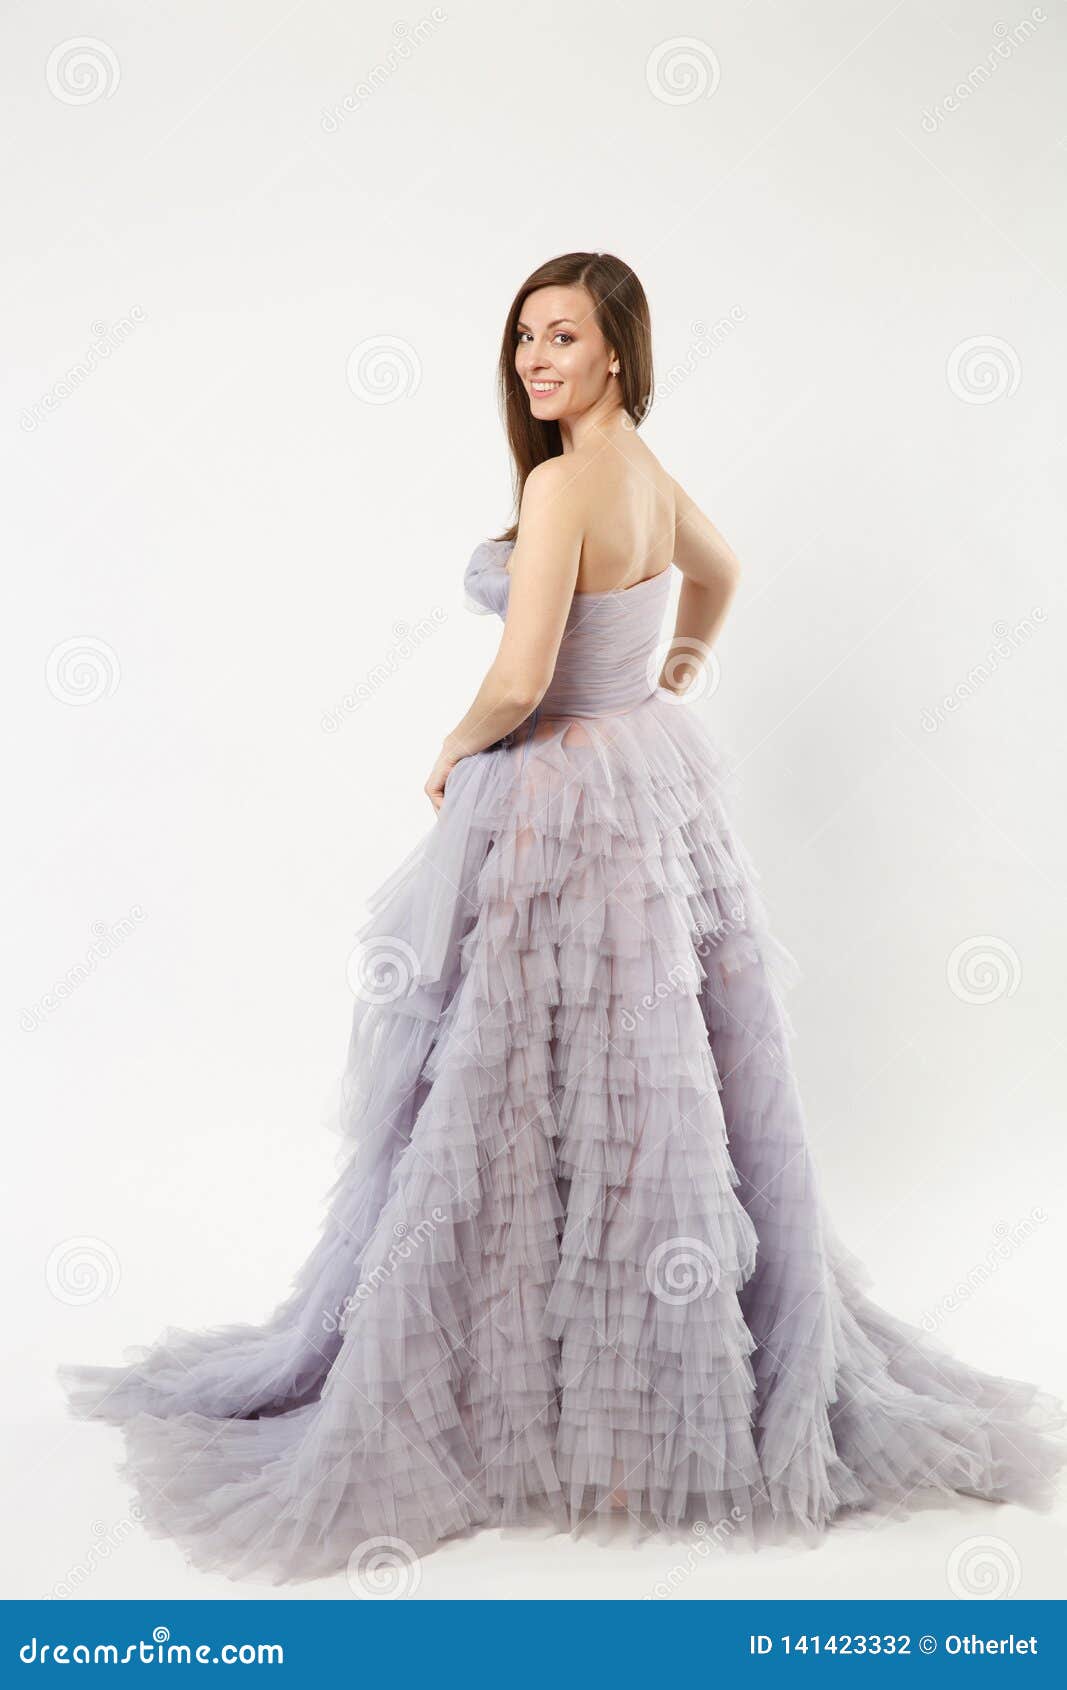 A Woman in Long Dress Posing for a Photoshoot · Free Stock Photo